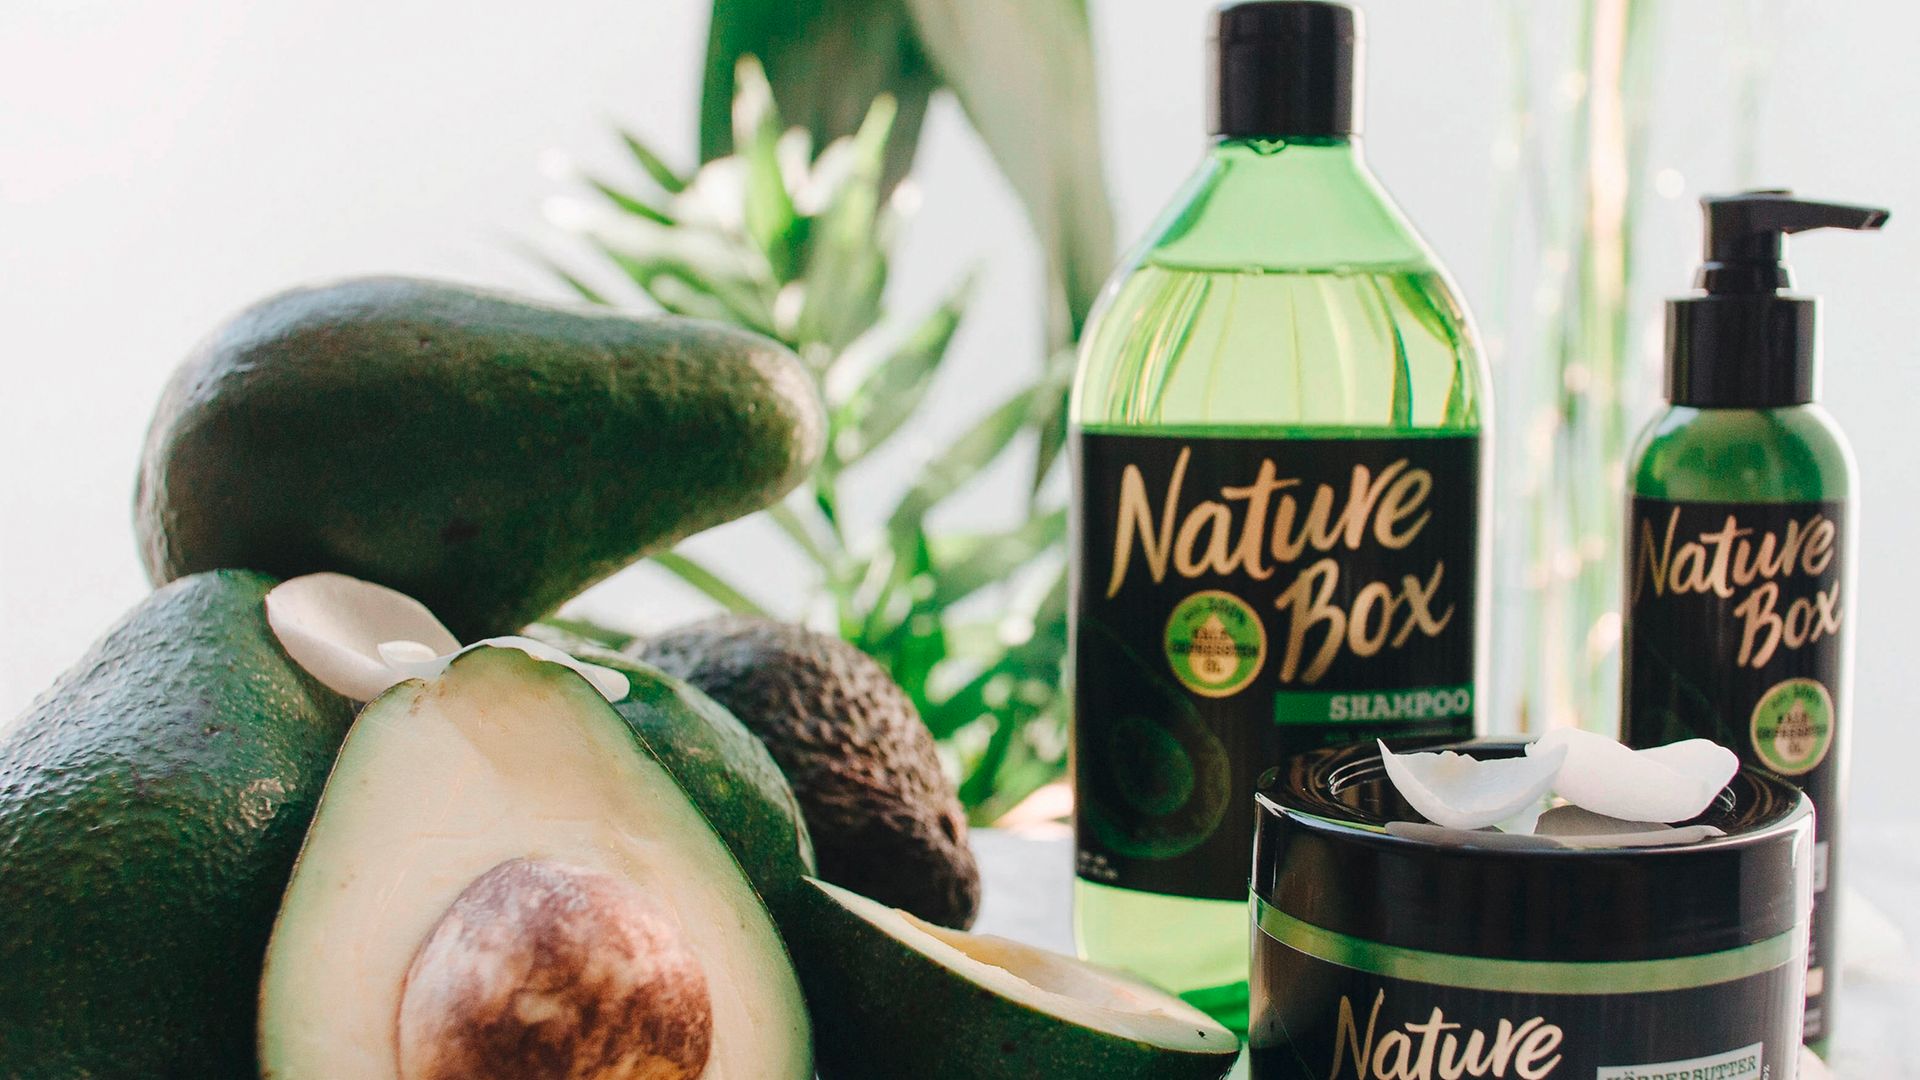 Sustainable packaging for the Nature Box range from Henkel